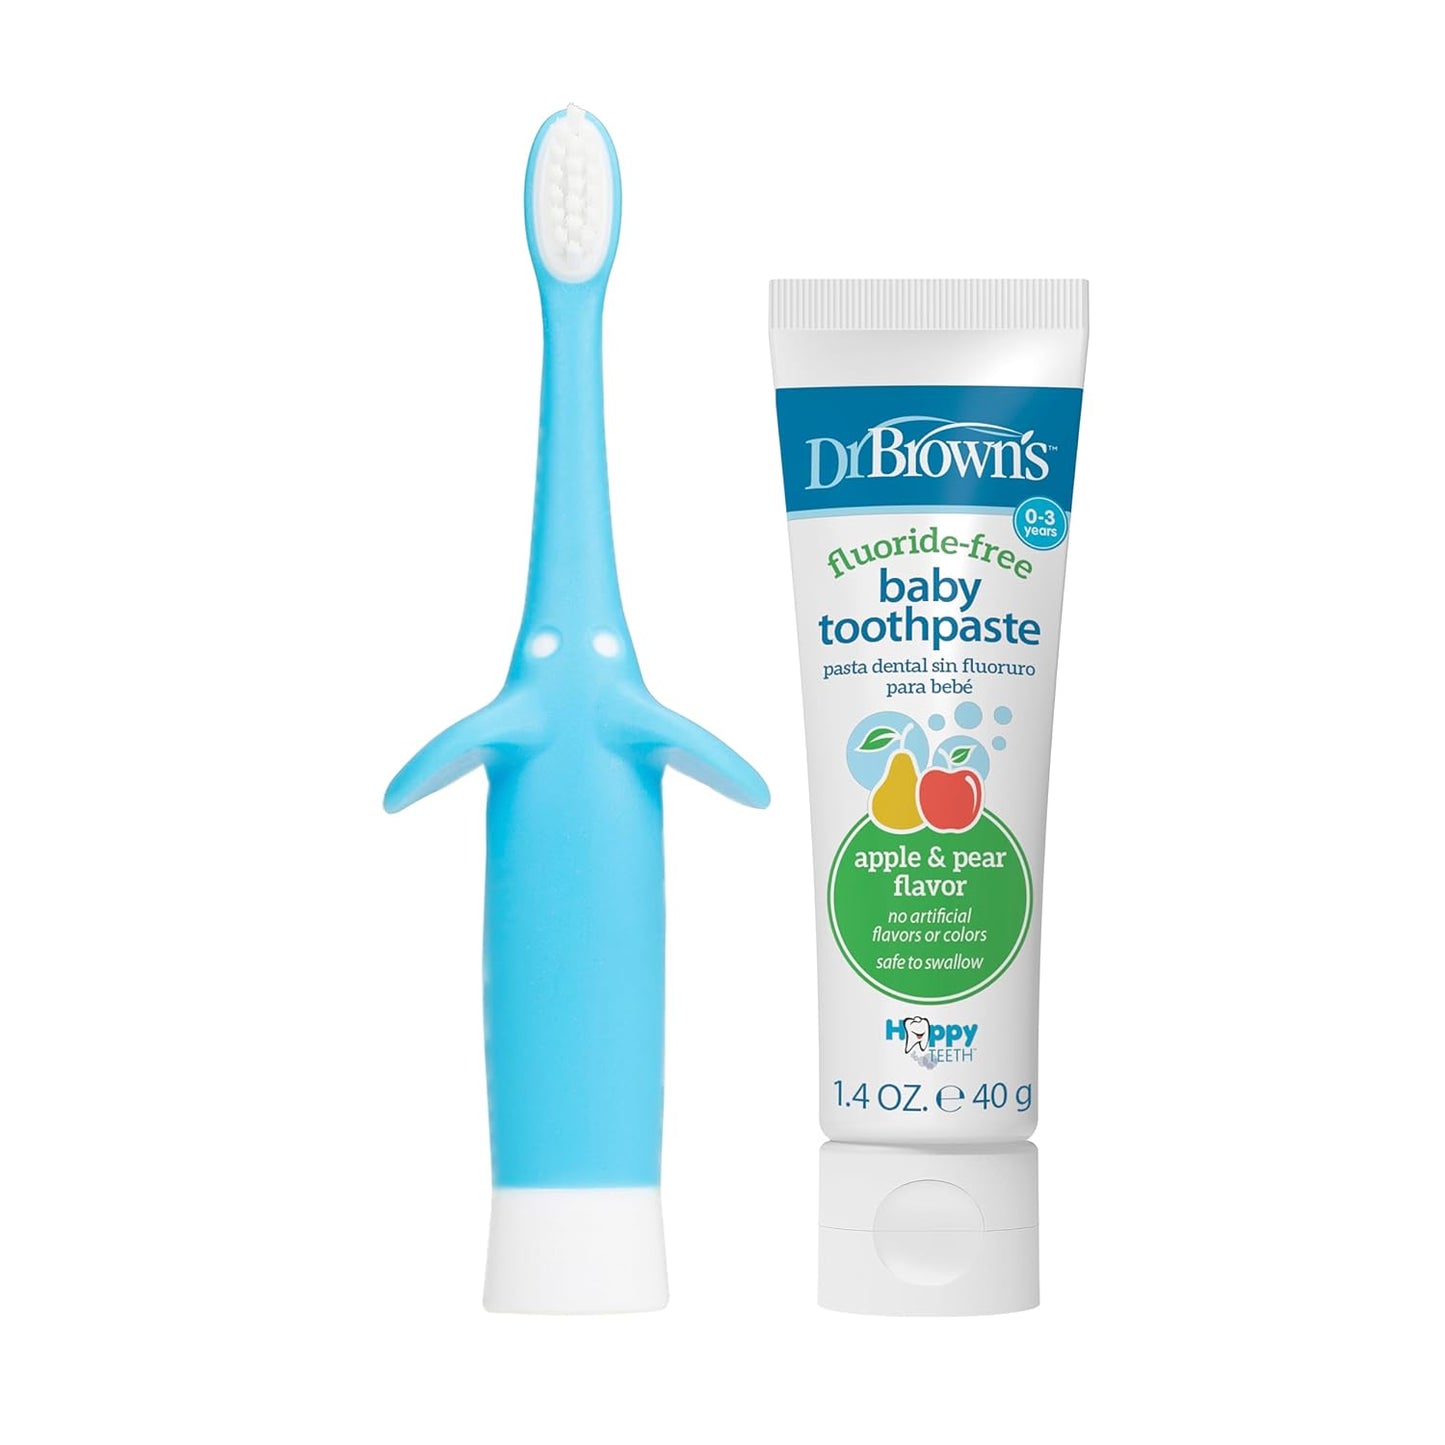 Dr. Brown's Infant-to-Toddler Training Toothbrush, Soft for Baby's First Teeth, Giraffe, 0-3 Years